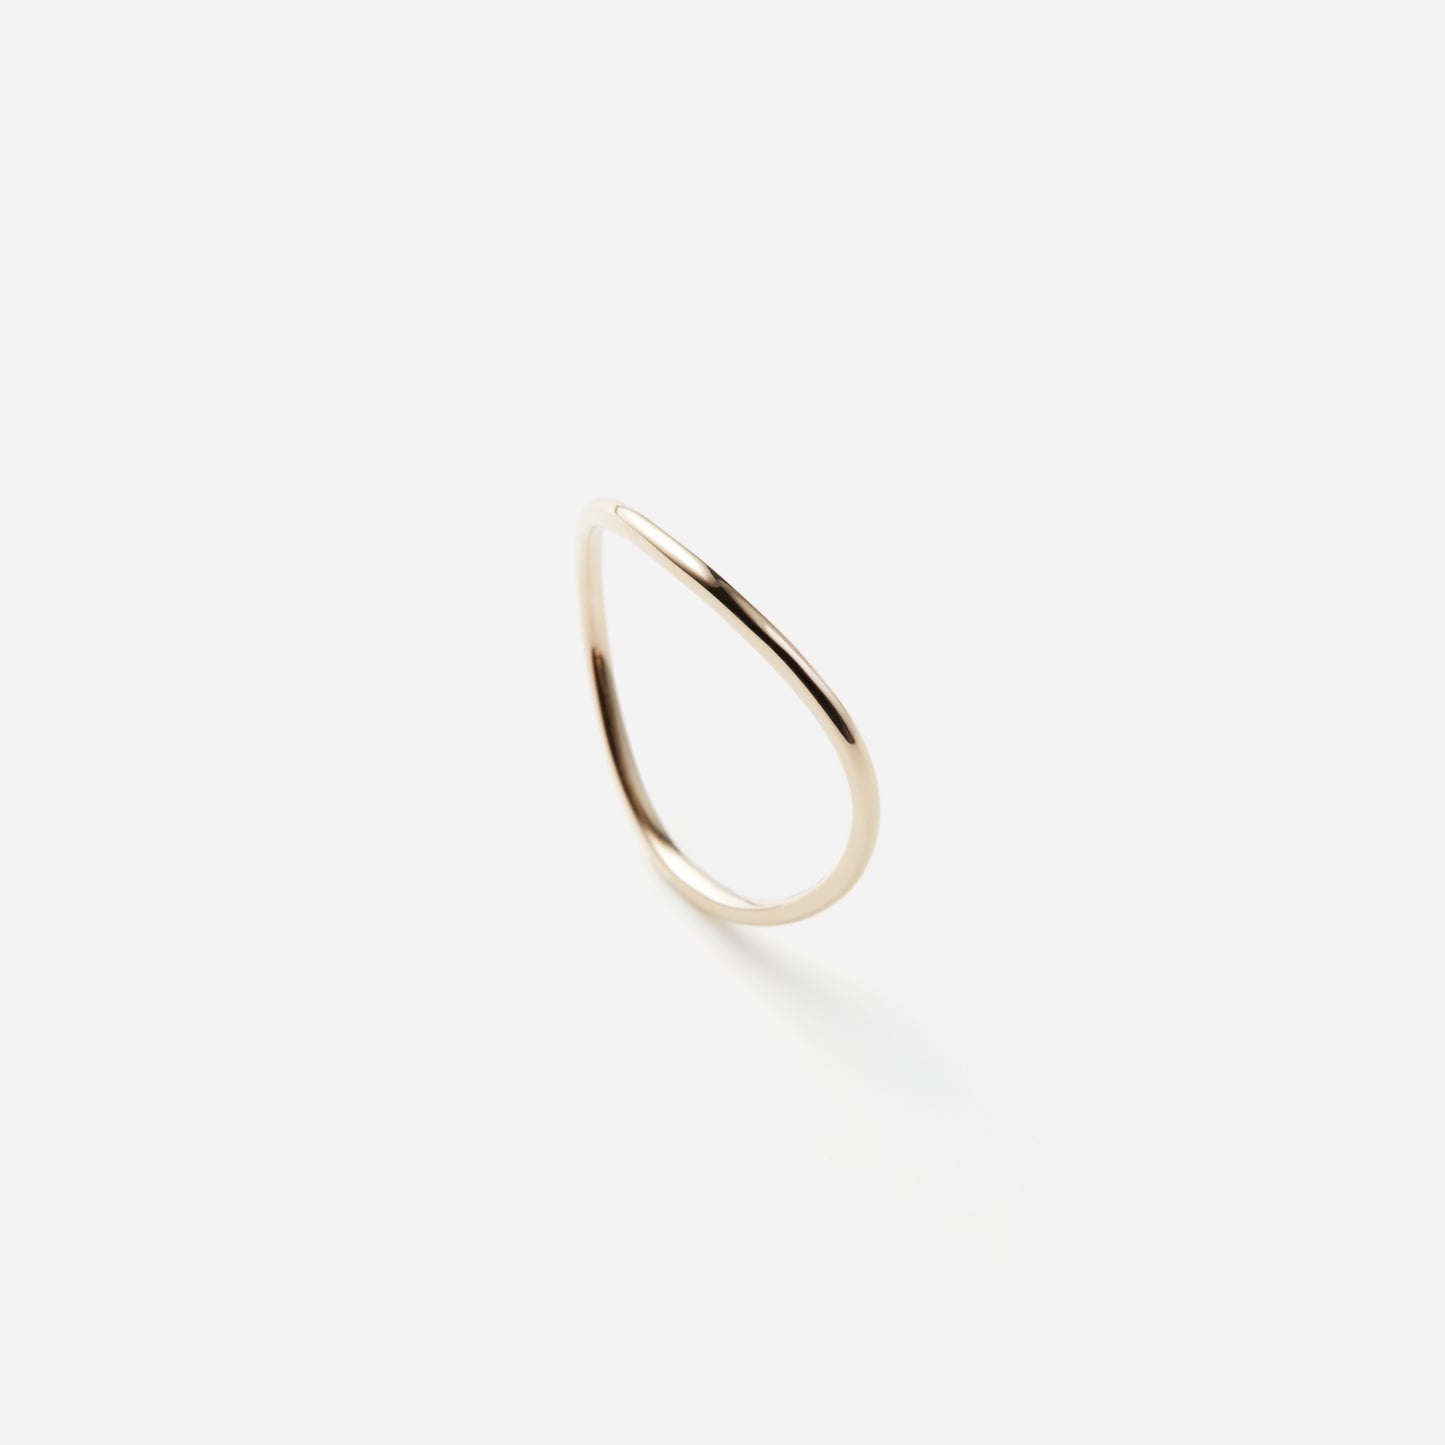 Layered Ring "Wave"